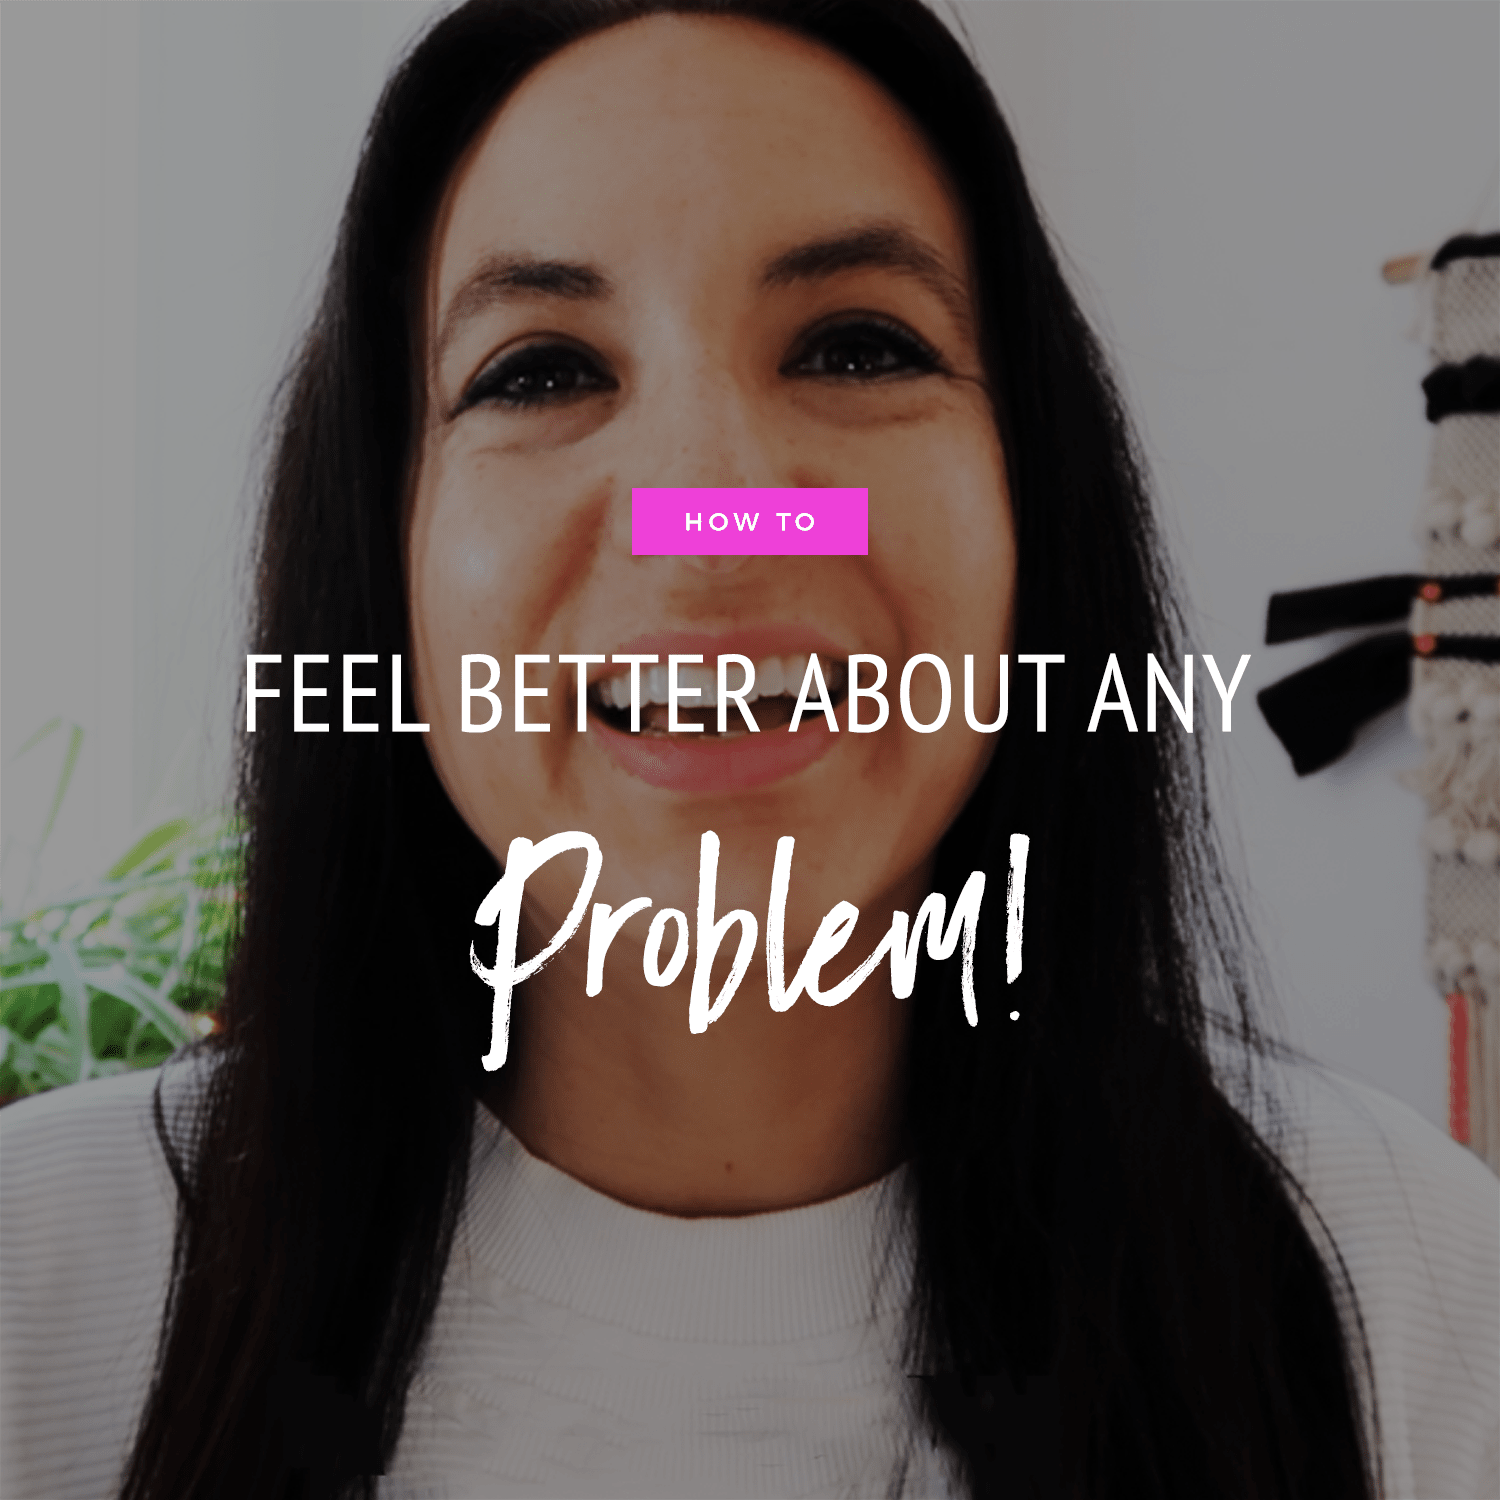 How To Feel Better About Any Problem